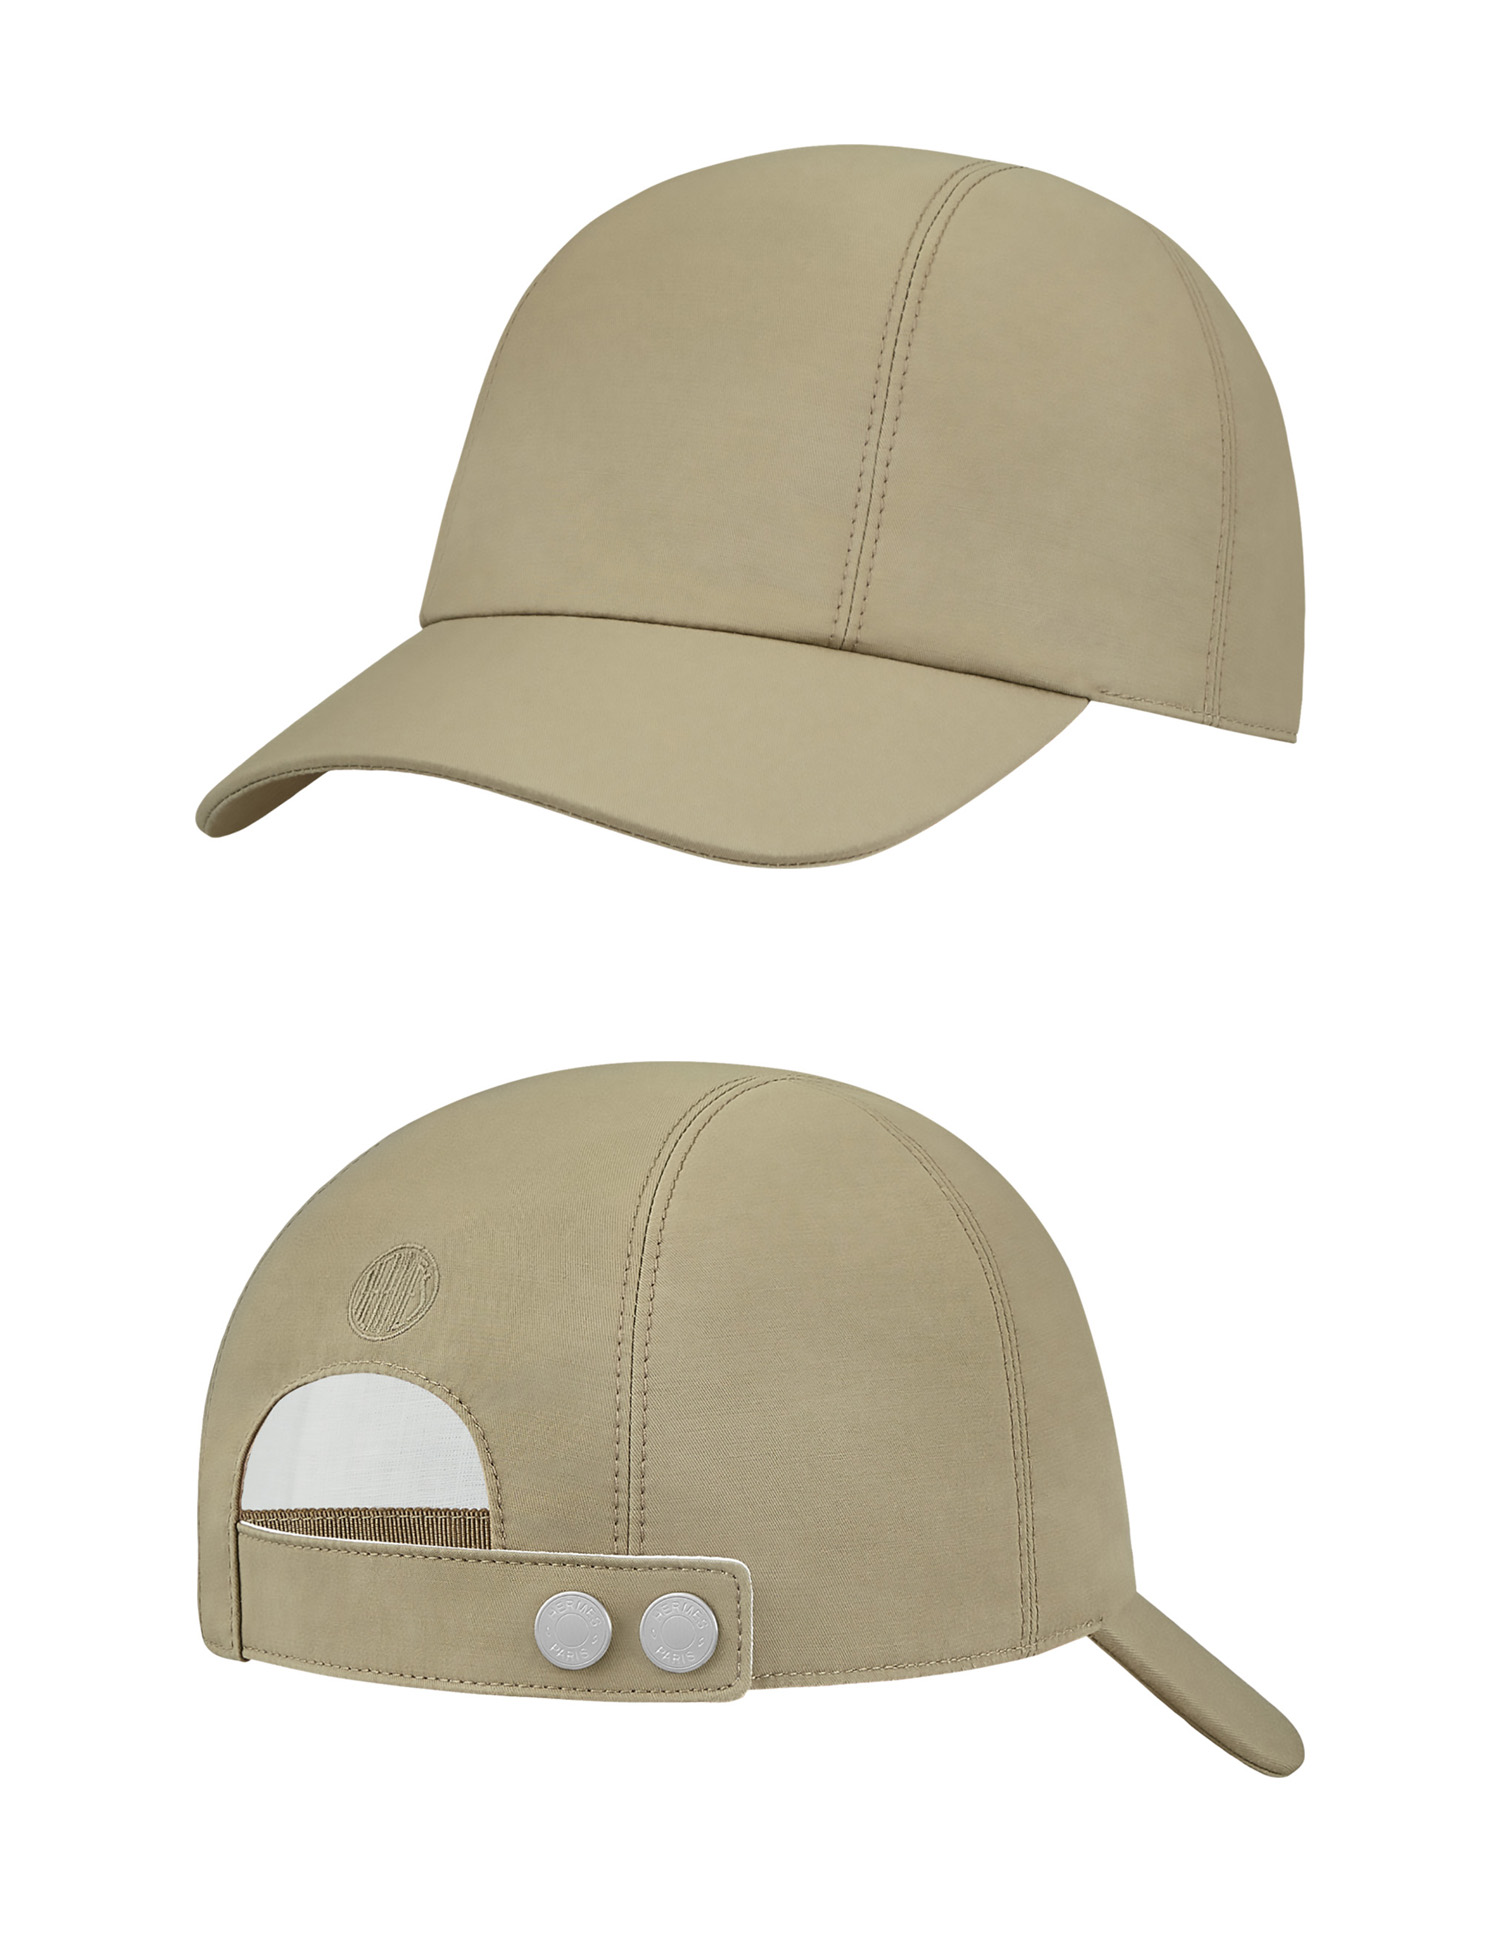 THE SELECTION BY SWAG HOMMES HERMÈS： CASQUETTE MILES SIGNATURE | SWAG